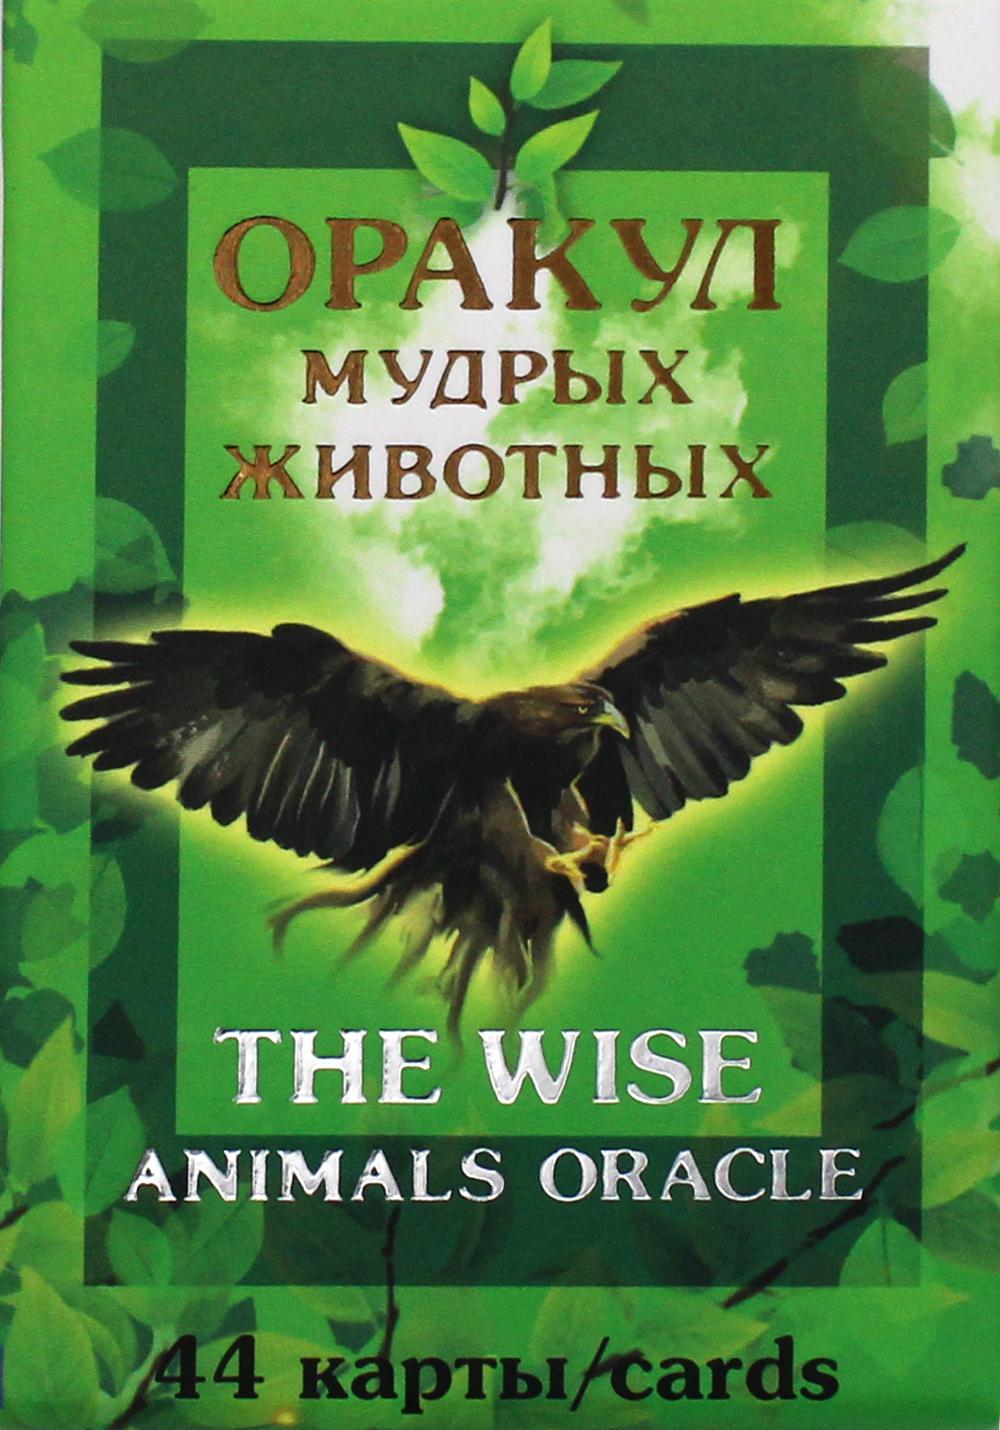 .   . The wise animals oracle.